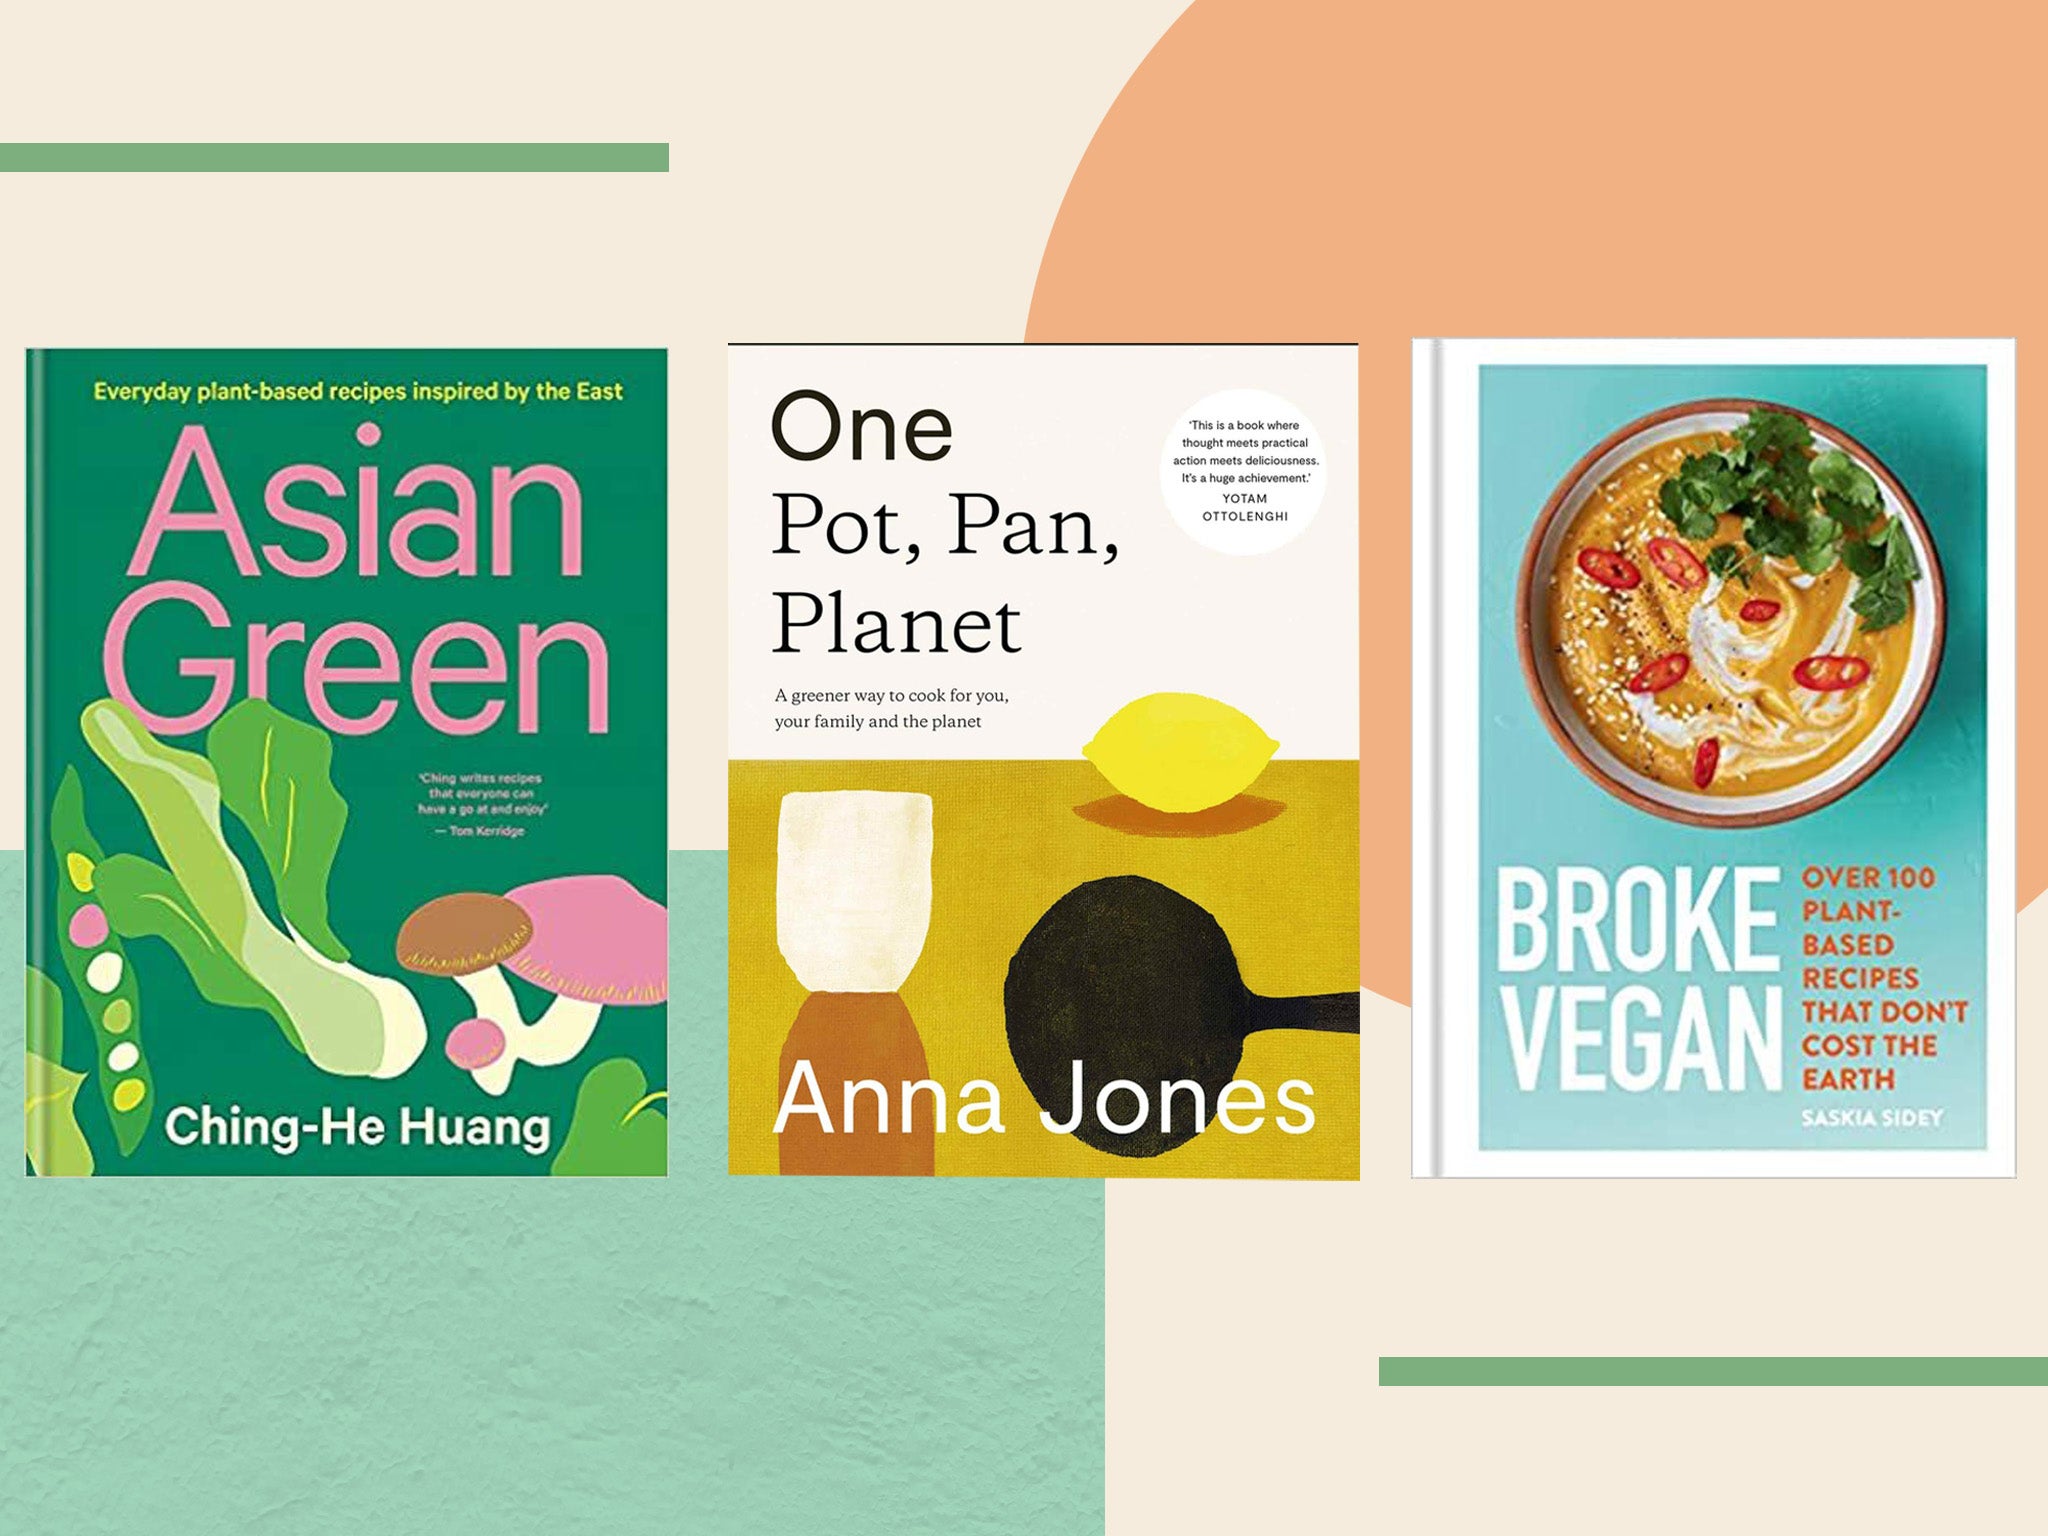 9 best vegan cookbooks filled with plant-based recipes perfect for Veganuary and beyond